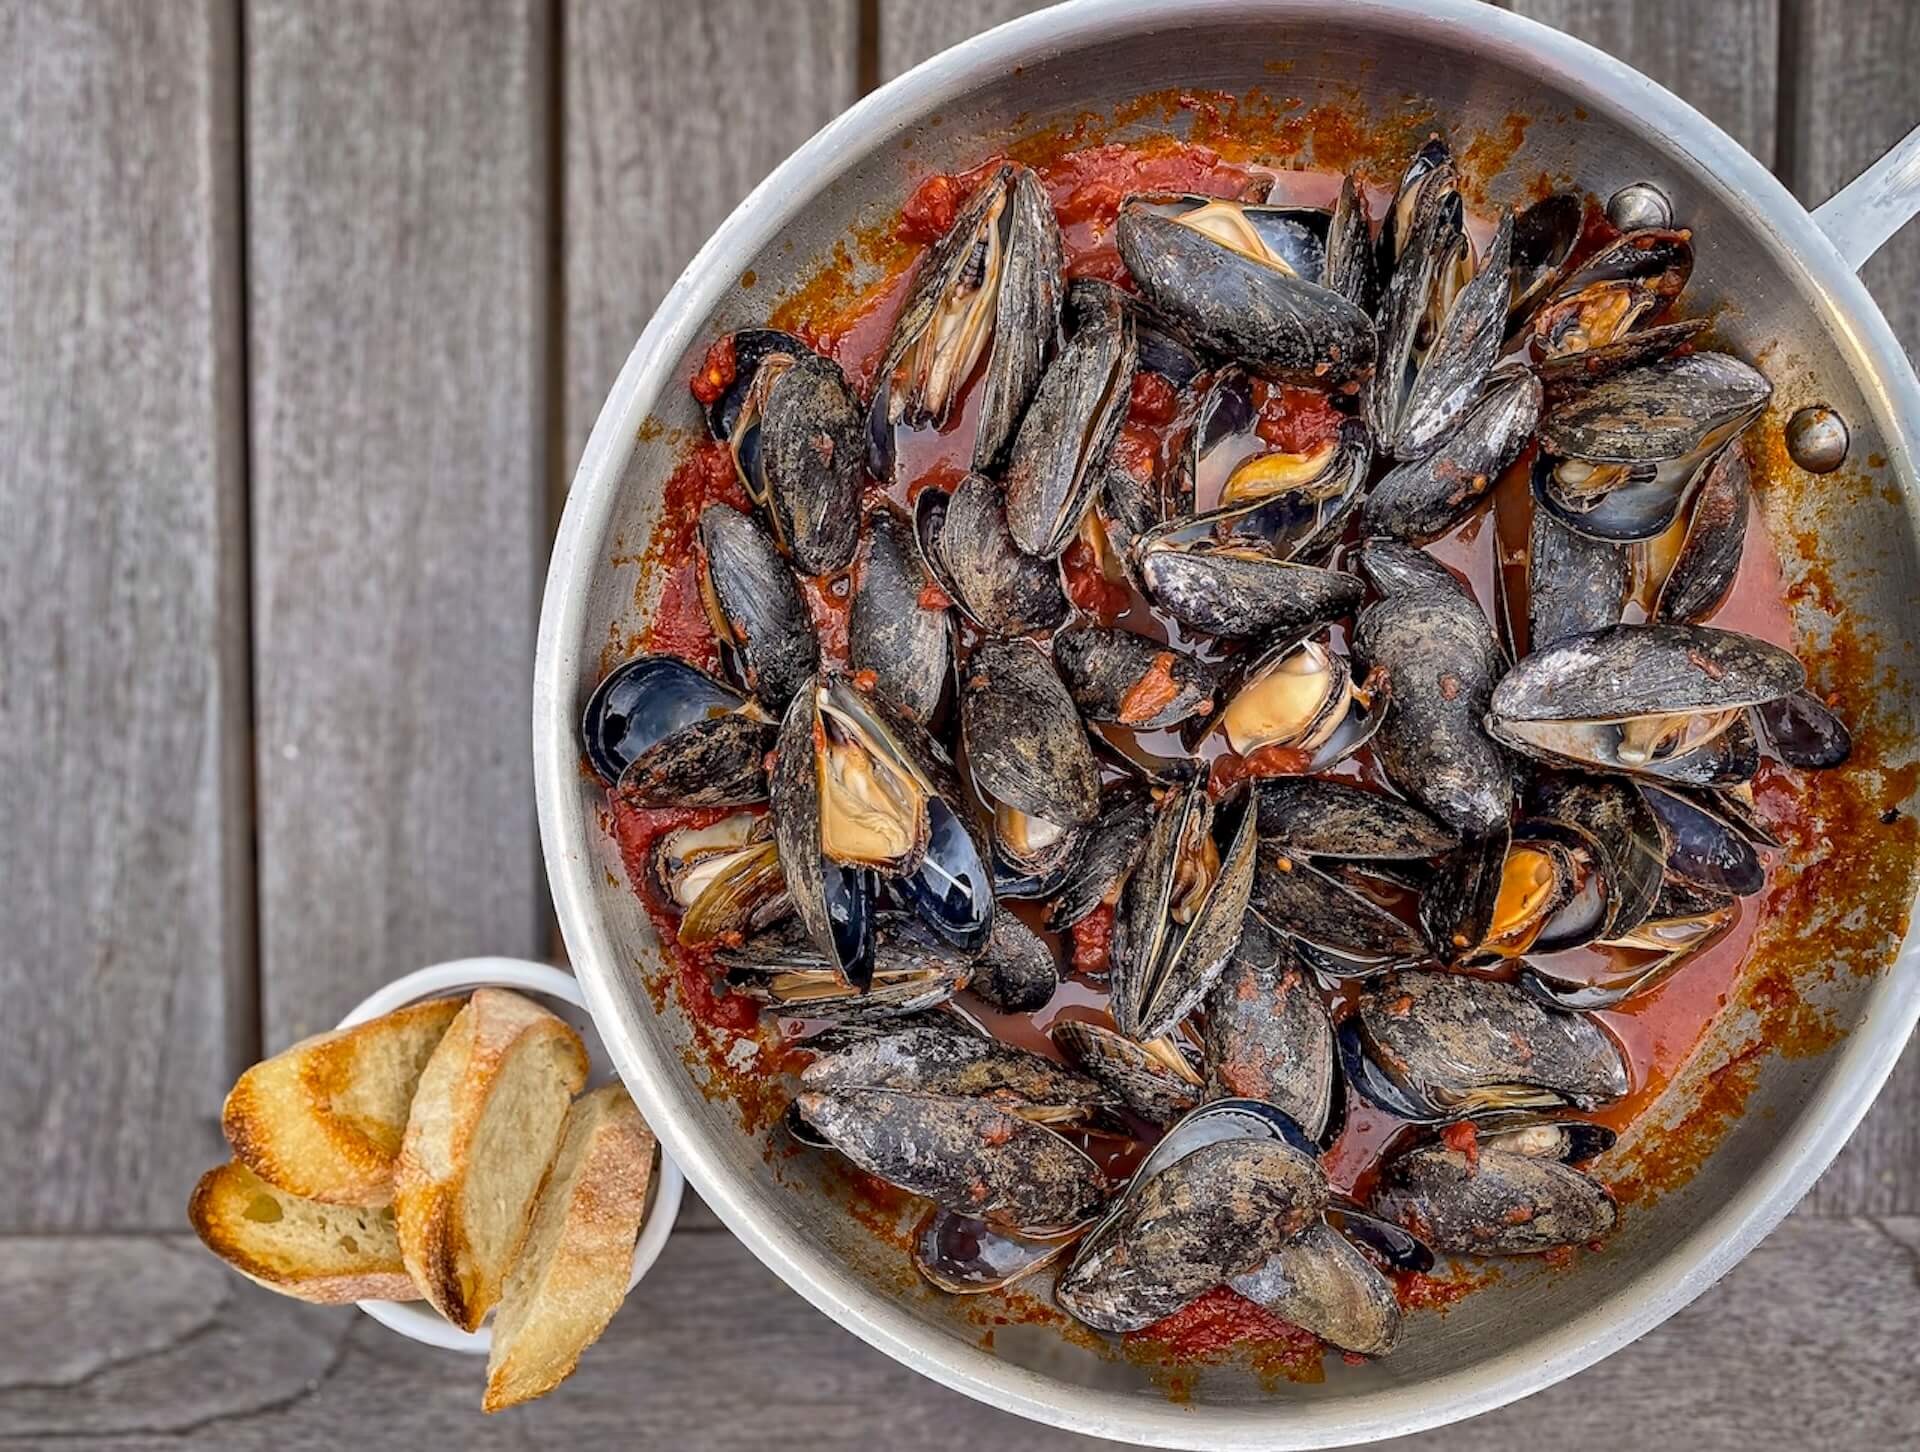 food picture - mussels in tomato sauce - overhead shot